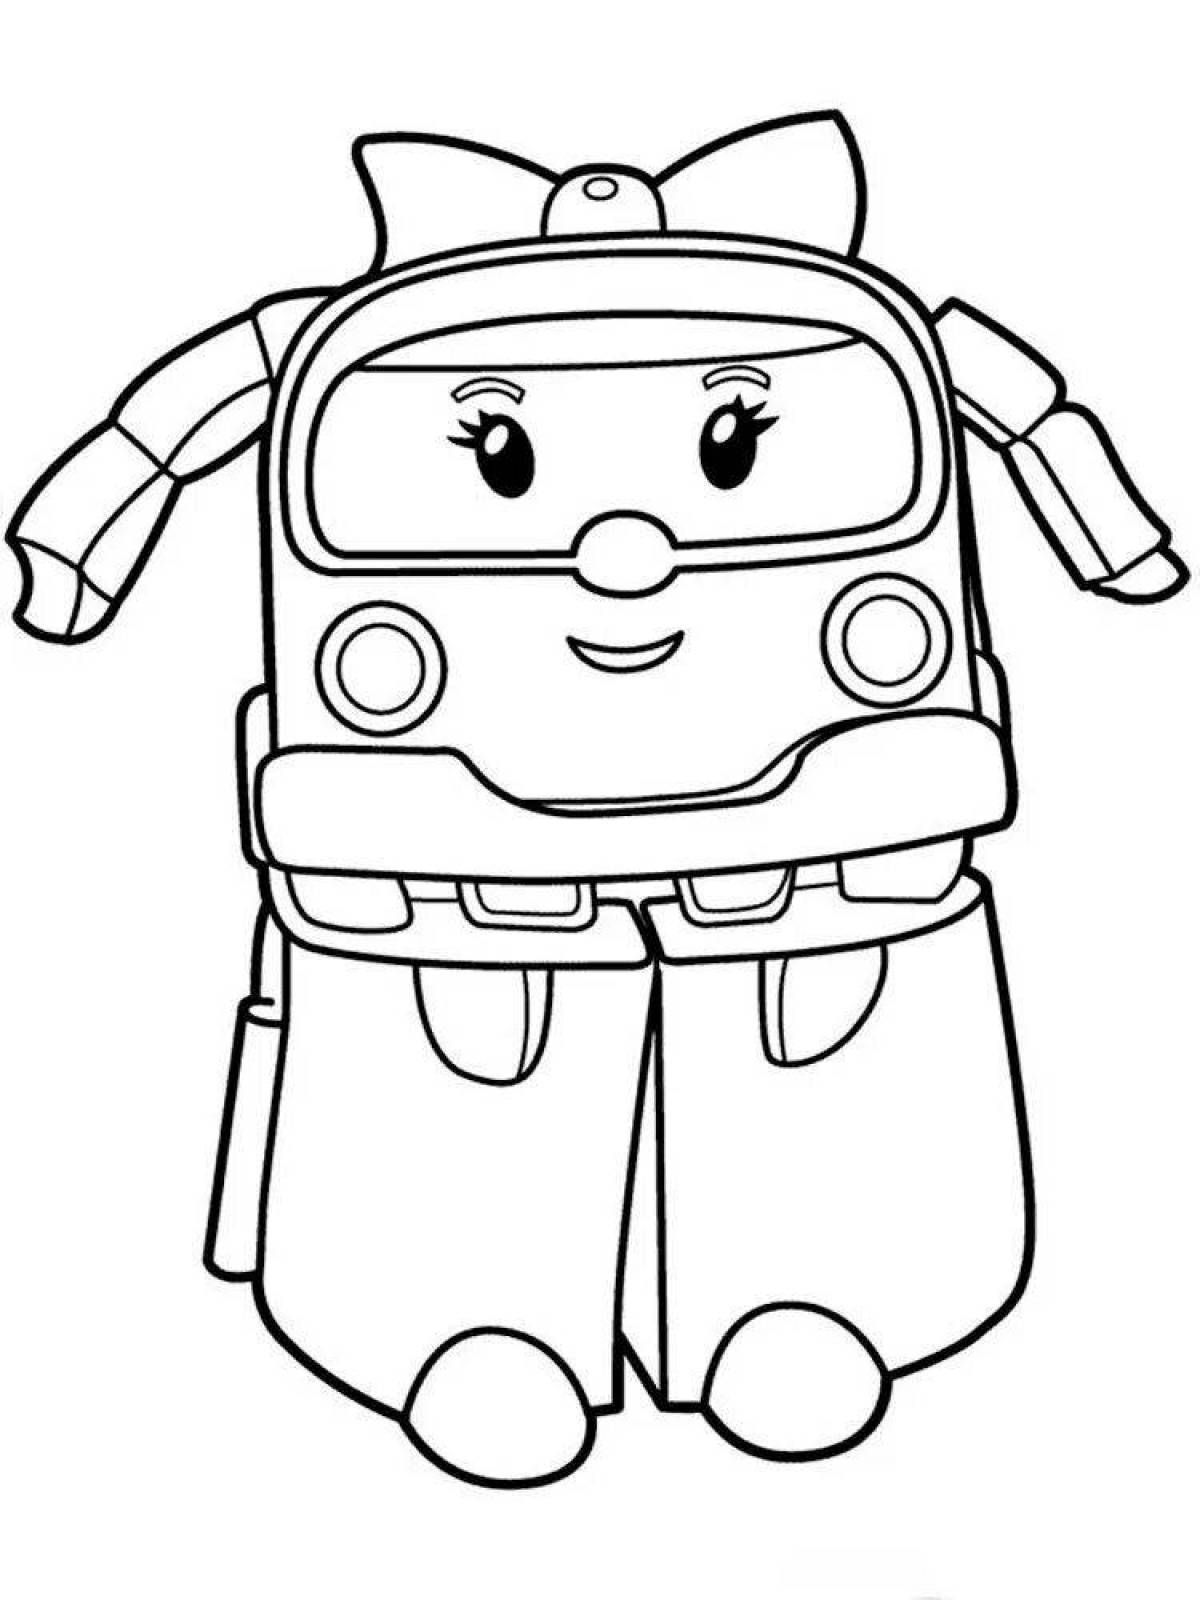 Colorful poly robot coloring book